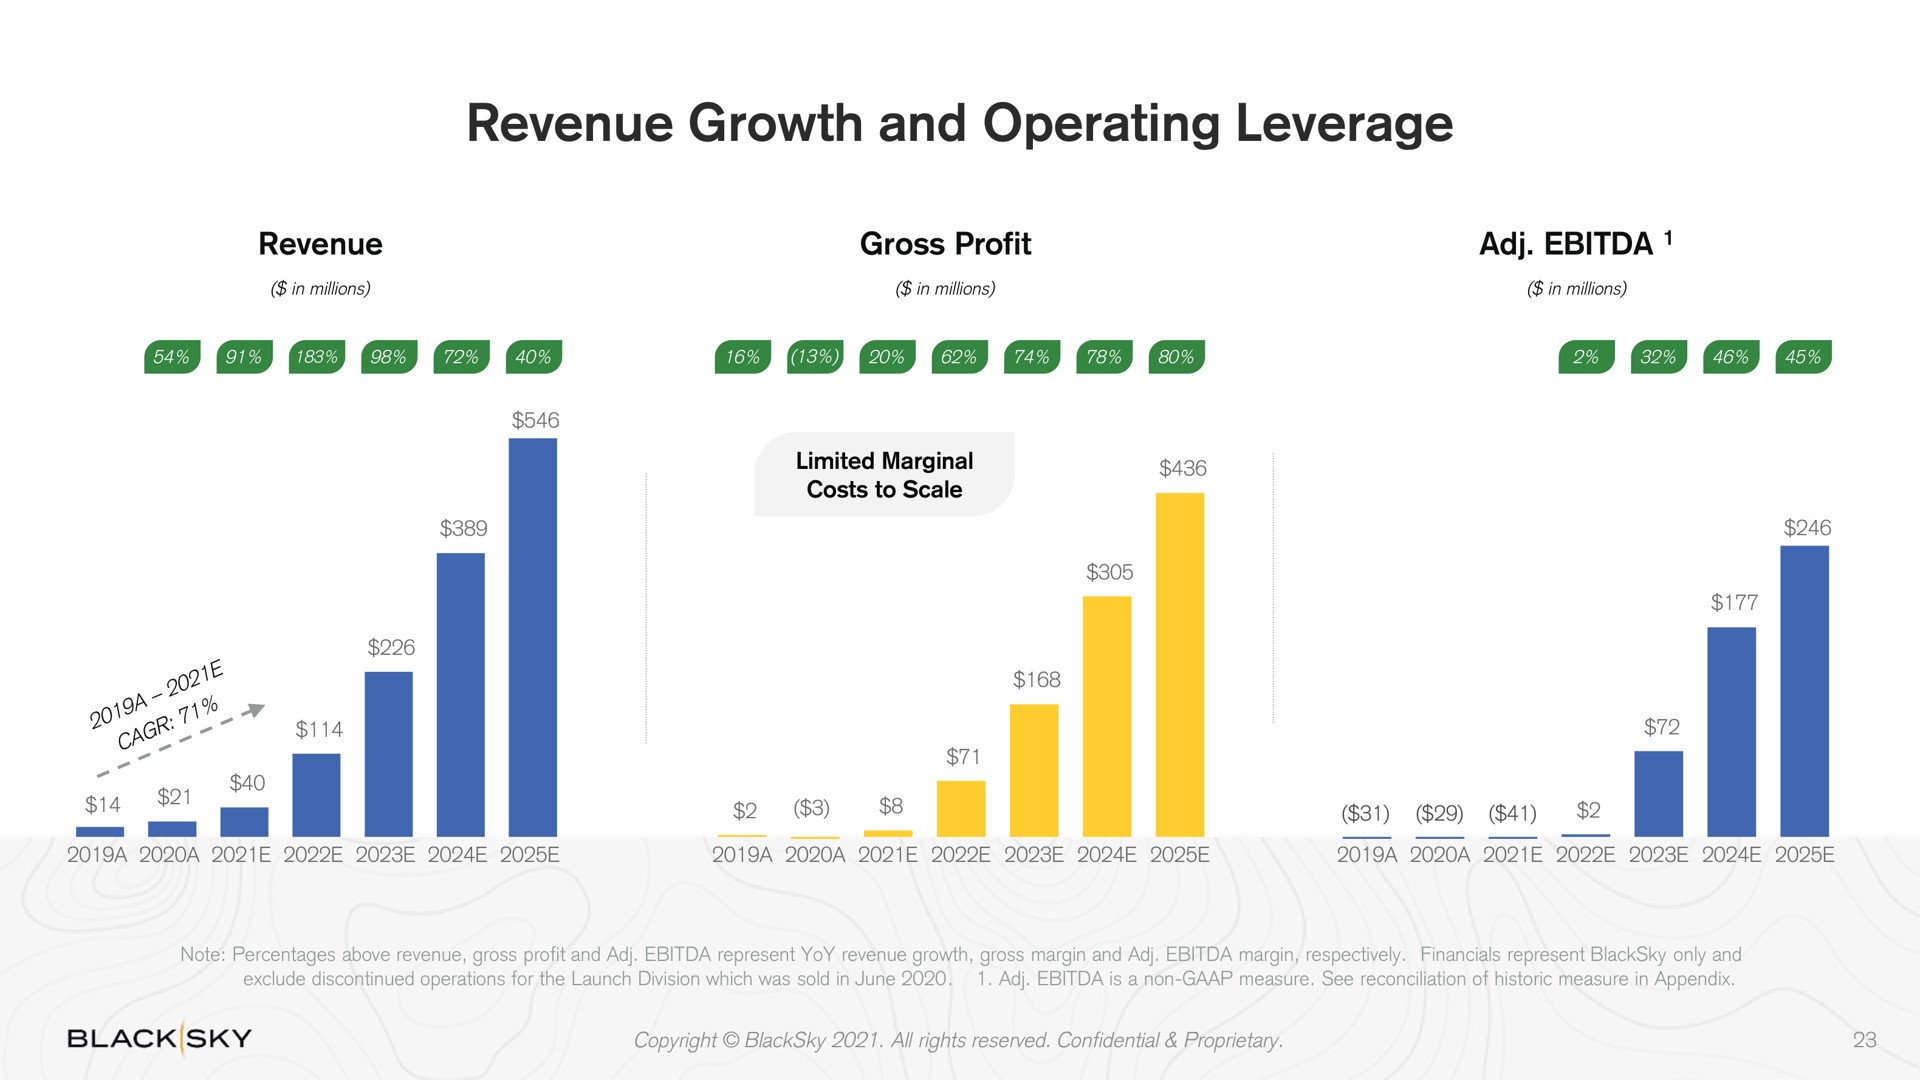 revenue growth and operating leverage | BlackSky